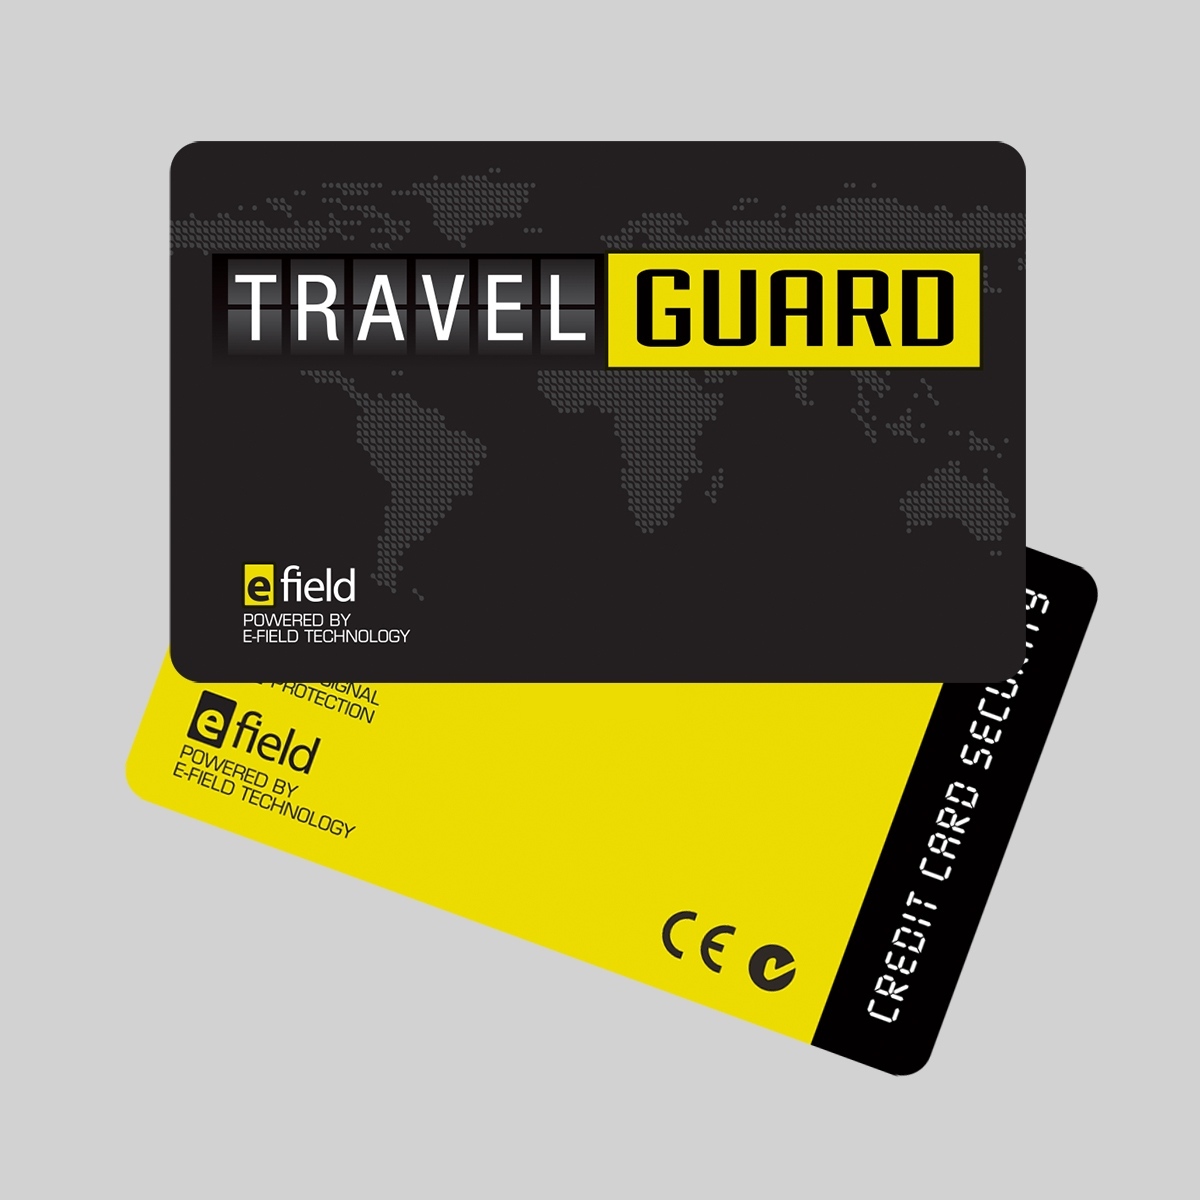 travel guard canada phone number